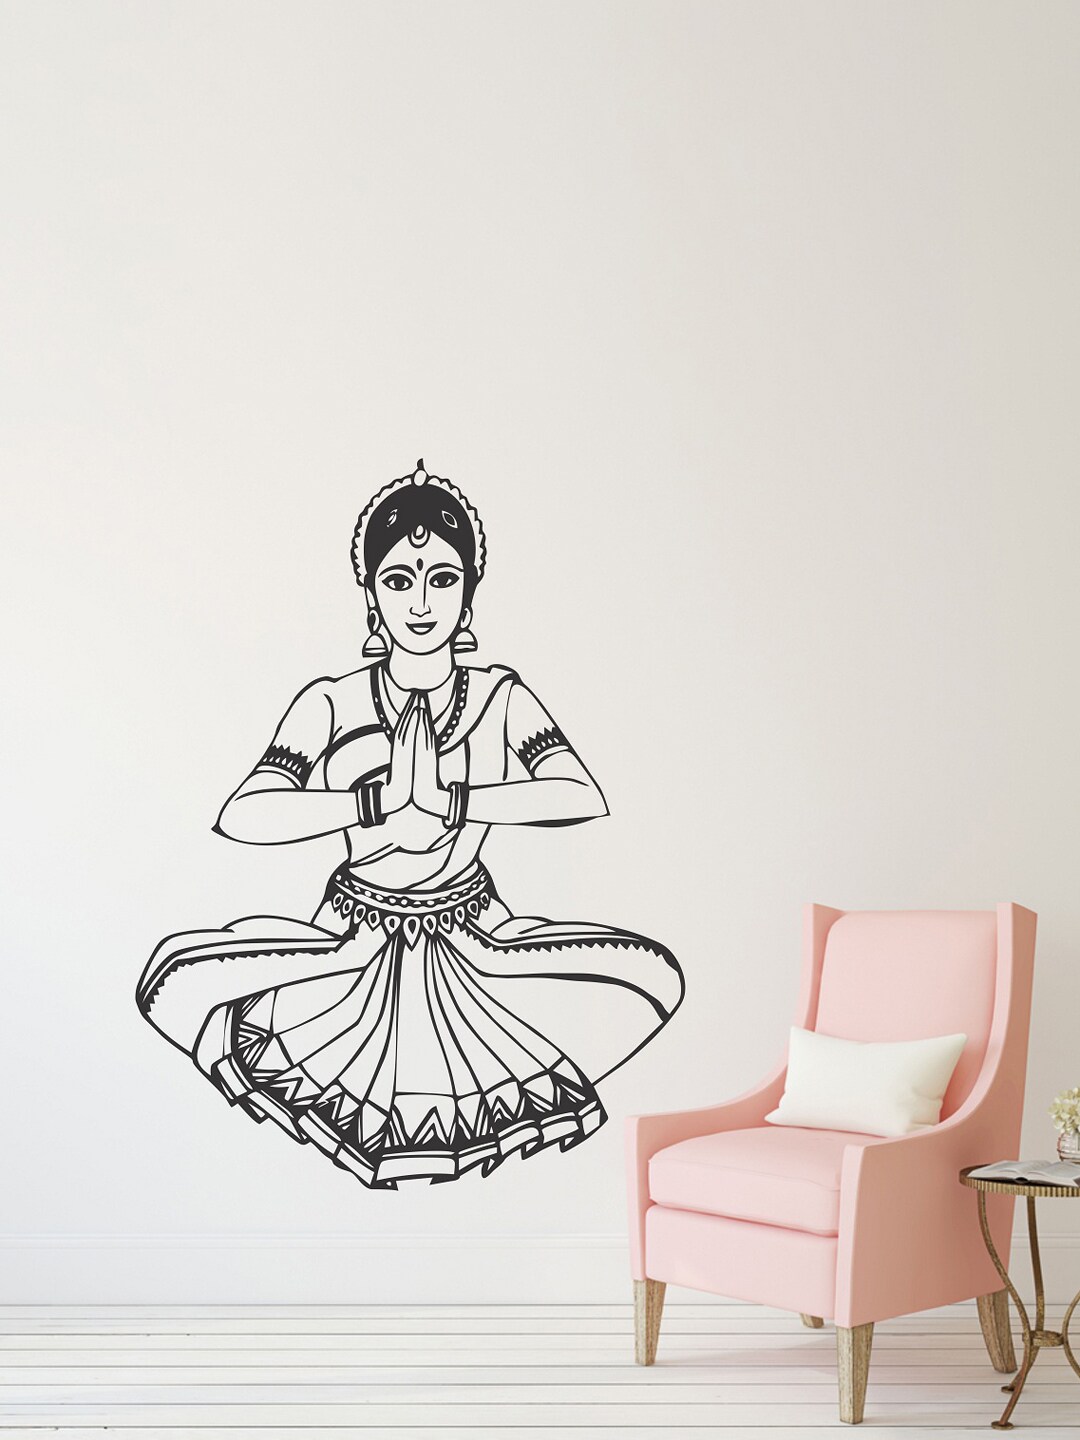 WALLSTICK Black Graphic Printed Wall Stickers Price in India